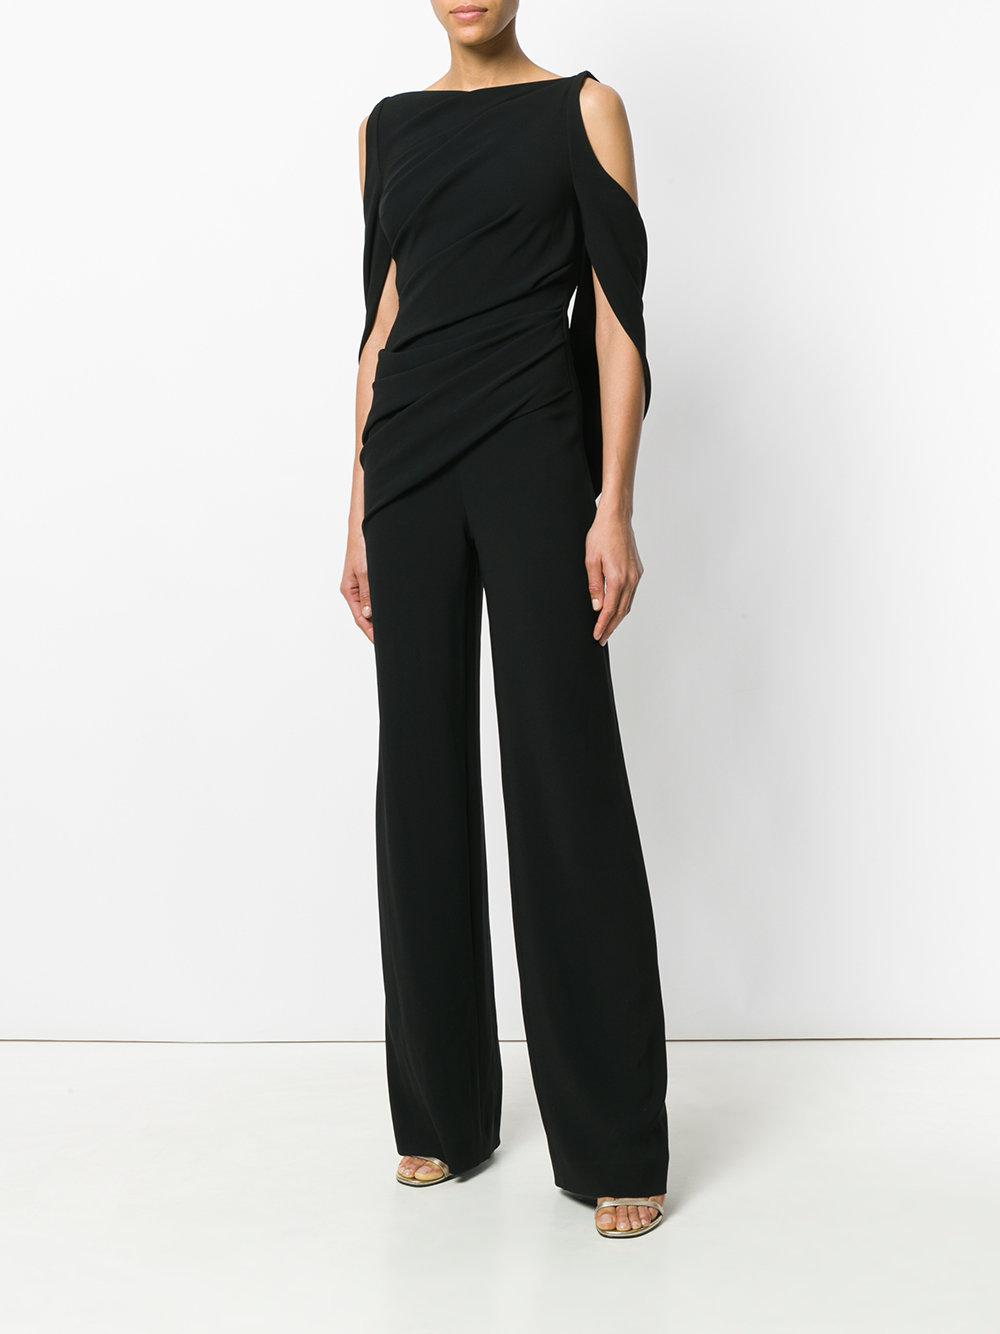 Talbot Runhof Synthetic Pigalle1 Jumpsuit in Black - Lyst